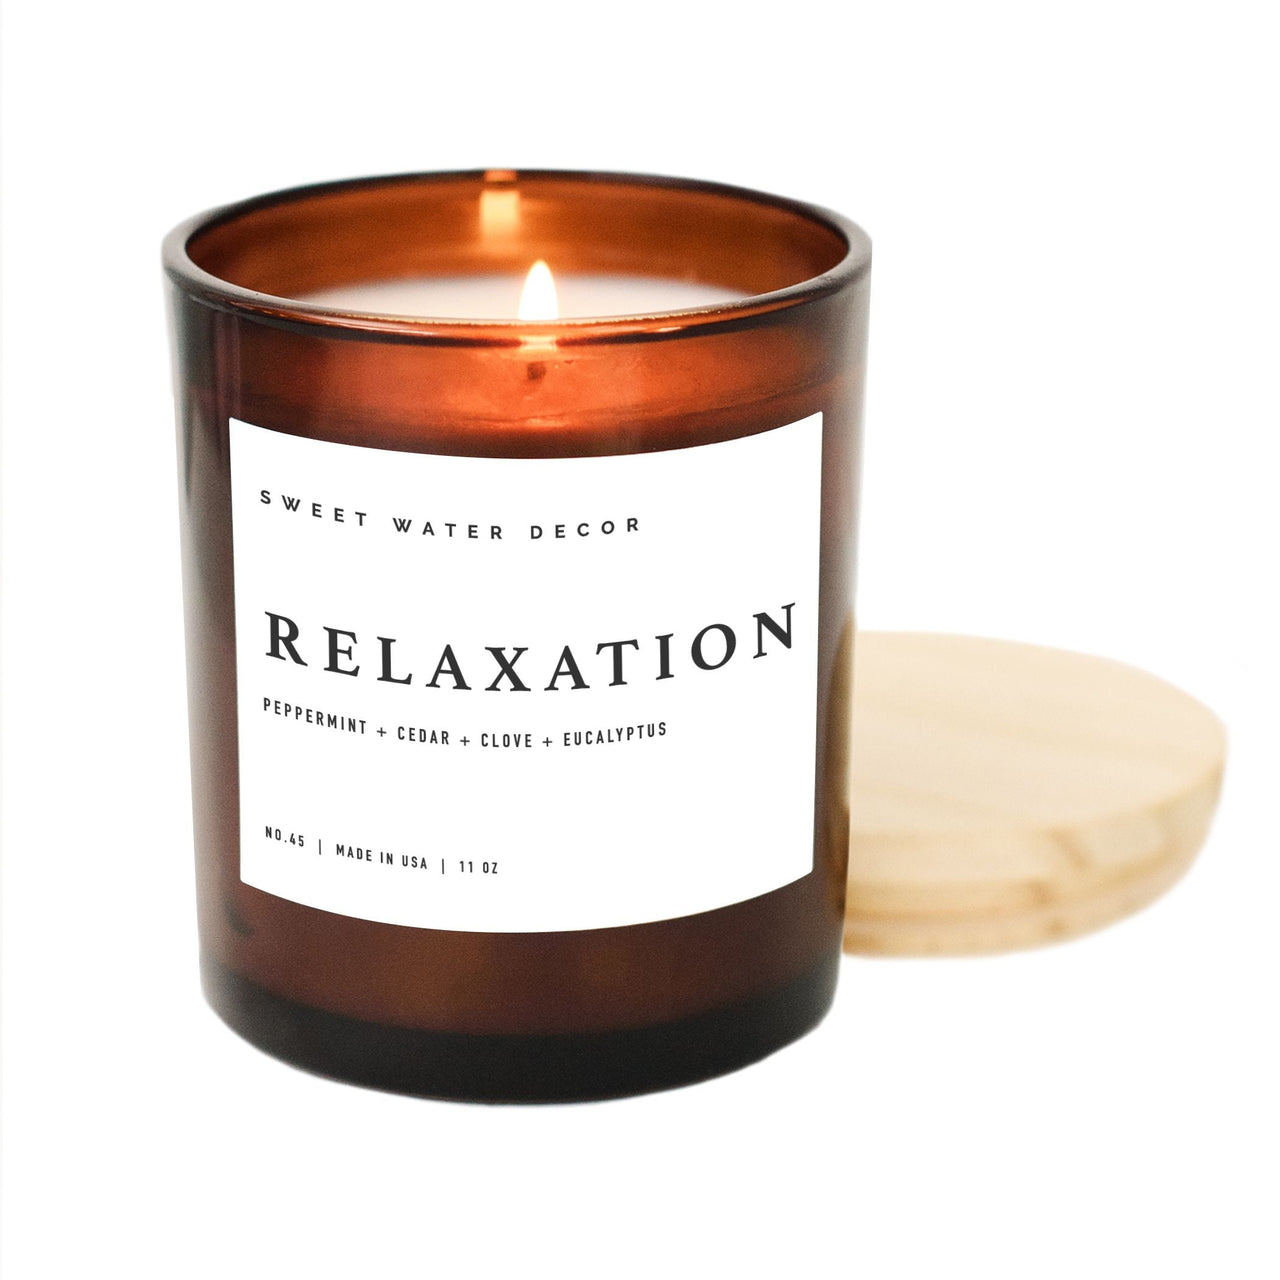 Relaxation Soy Candle - Amber Jar - 11 oz - Tony's Home Furnishings